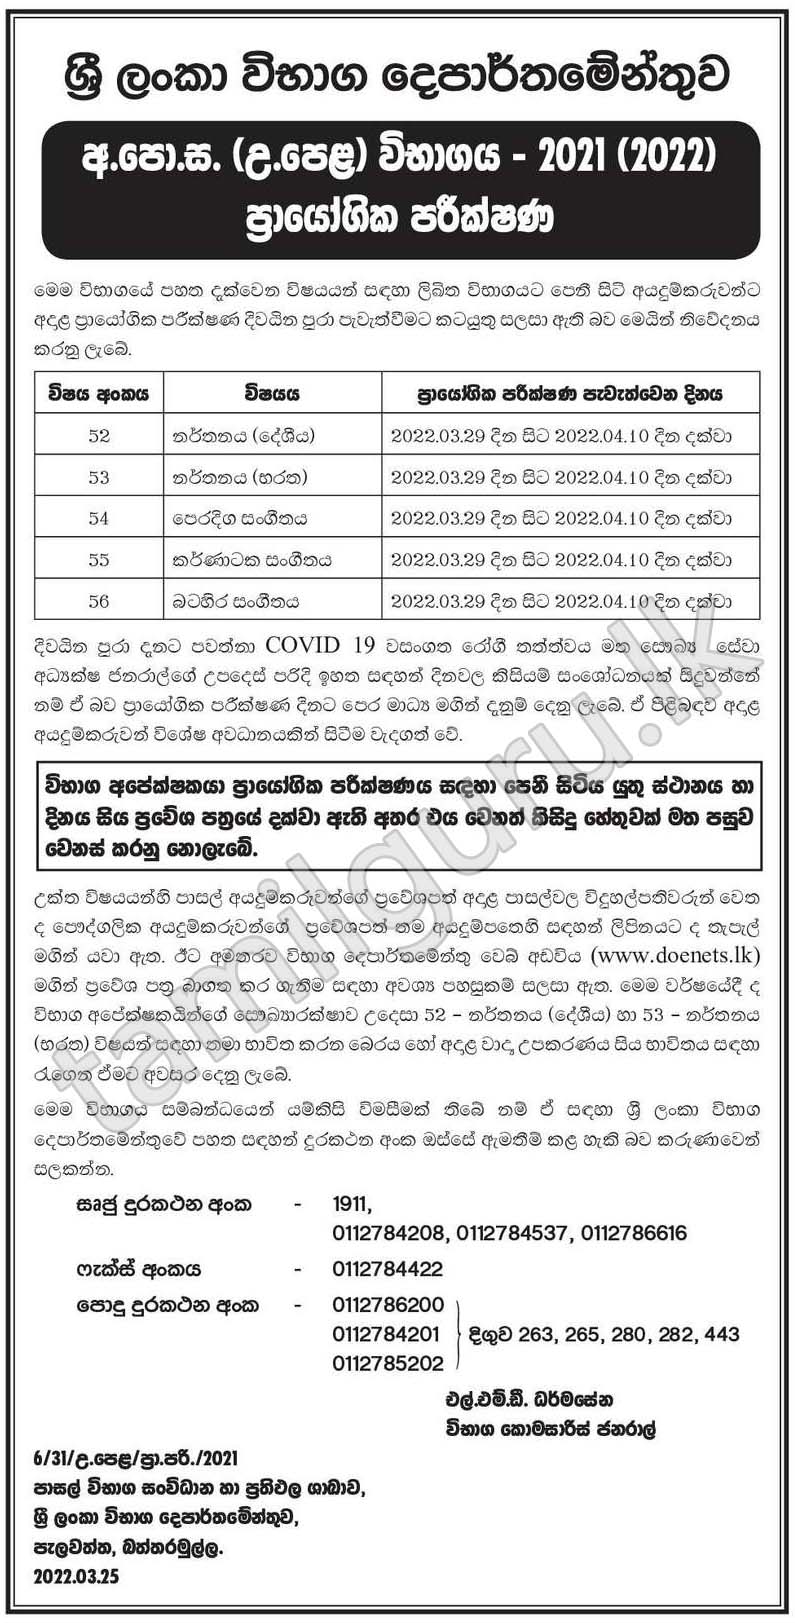 Exam Dates & Admission Card for GCE A/L Examination 2021 (2022) - Practical Test (Notice in Sinhala)